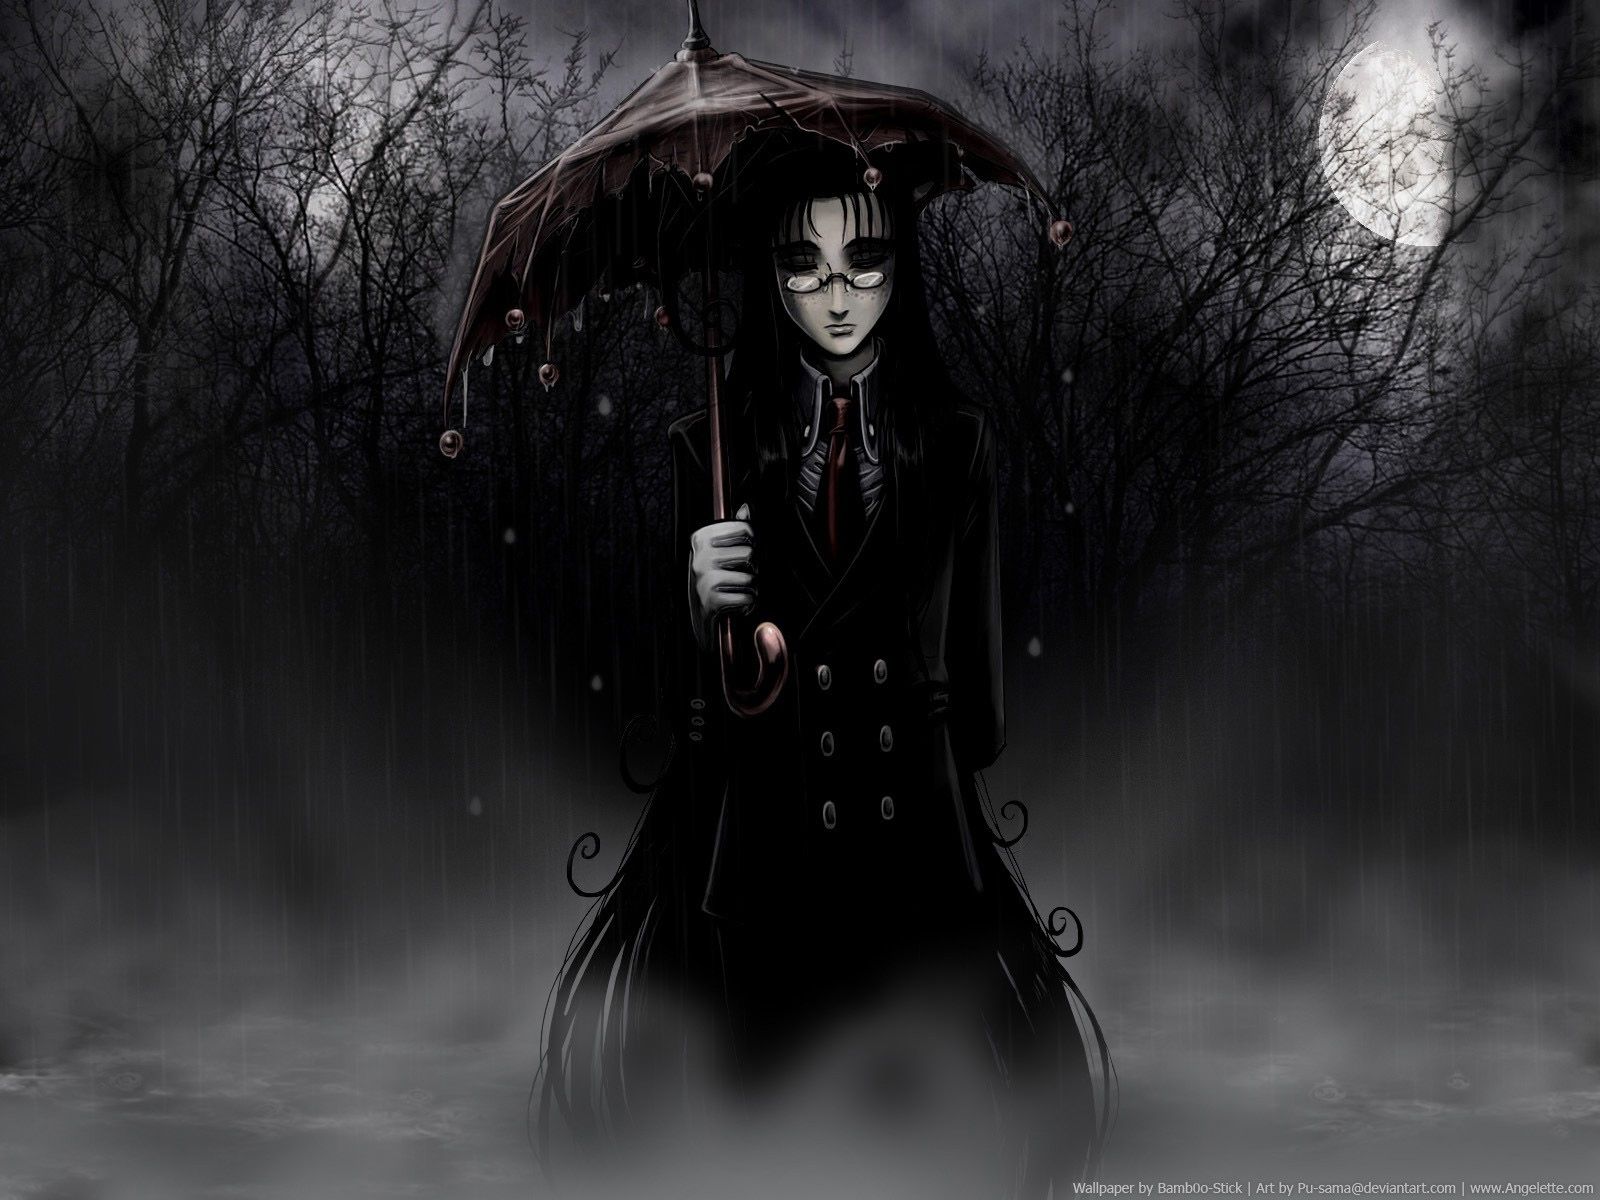 Gothic wallpaper with a gothic girl with umbrella in the rain - Dark anime, black anime